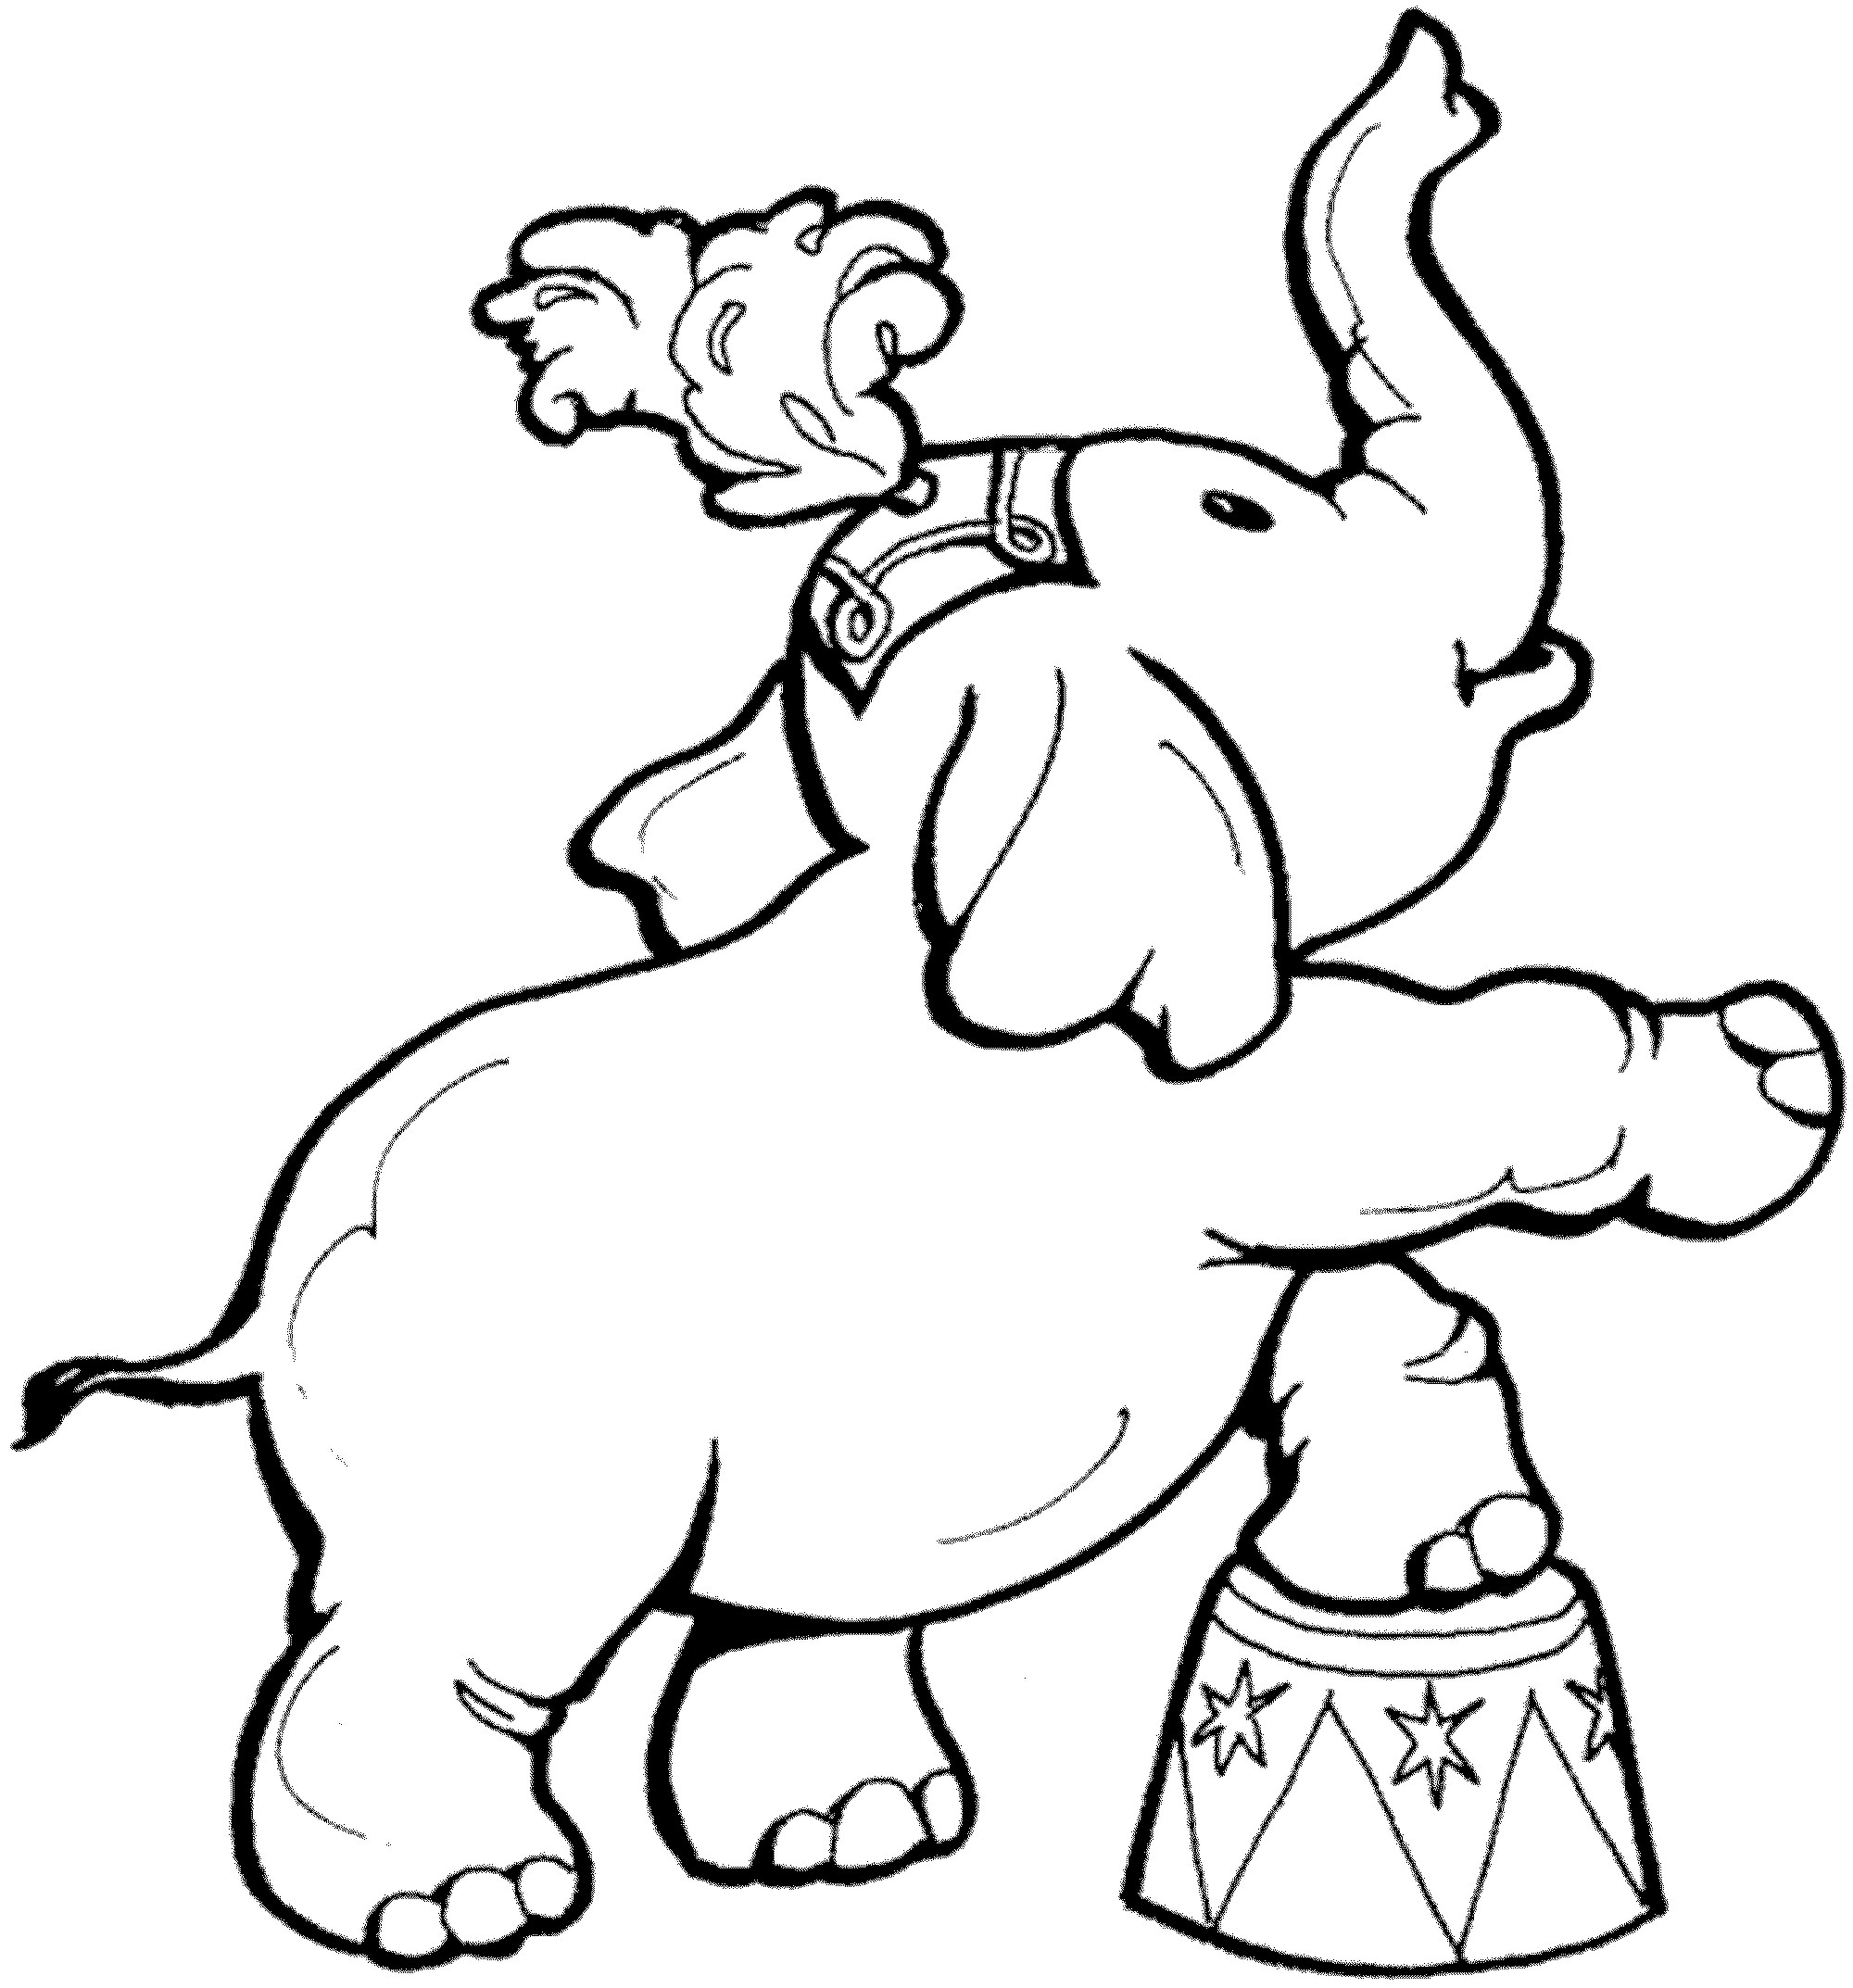 Coloring Pages Of Elephants
 coloring page elephant